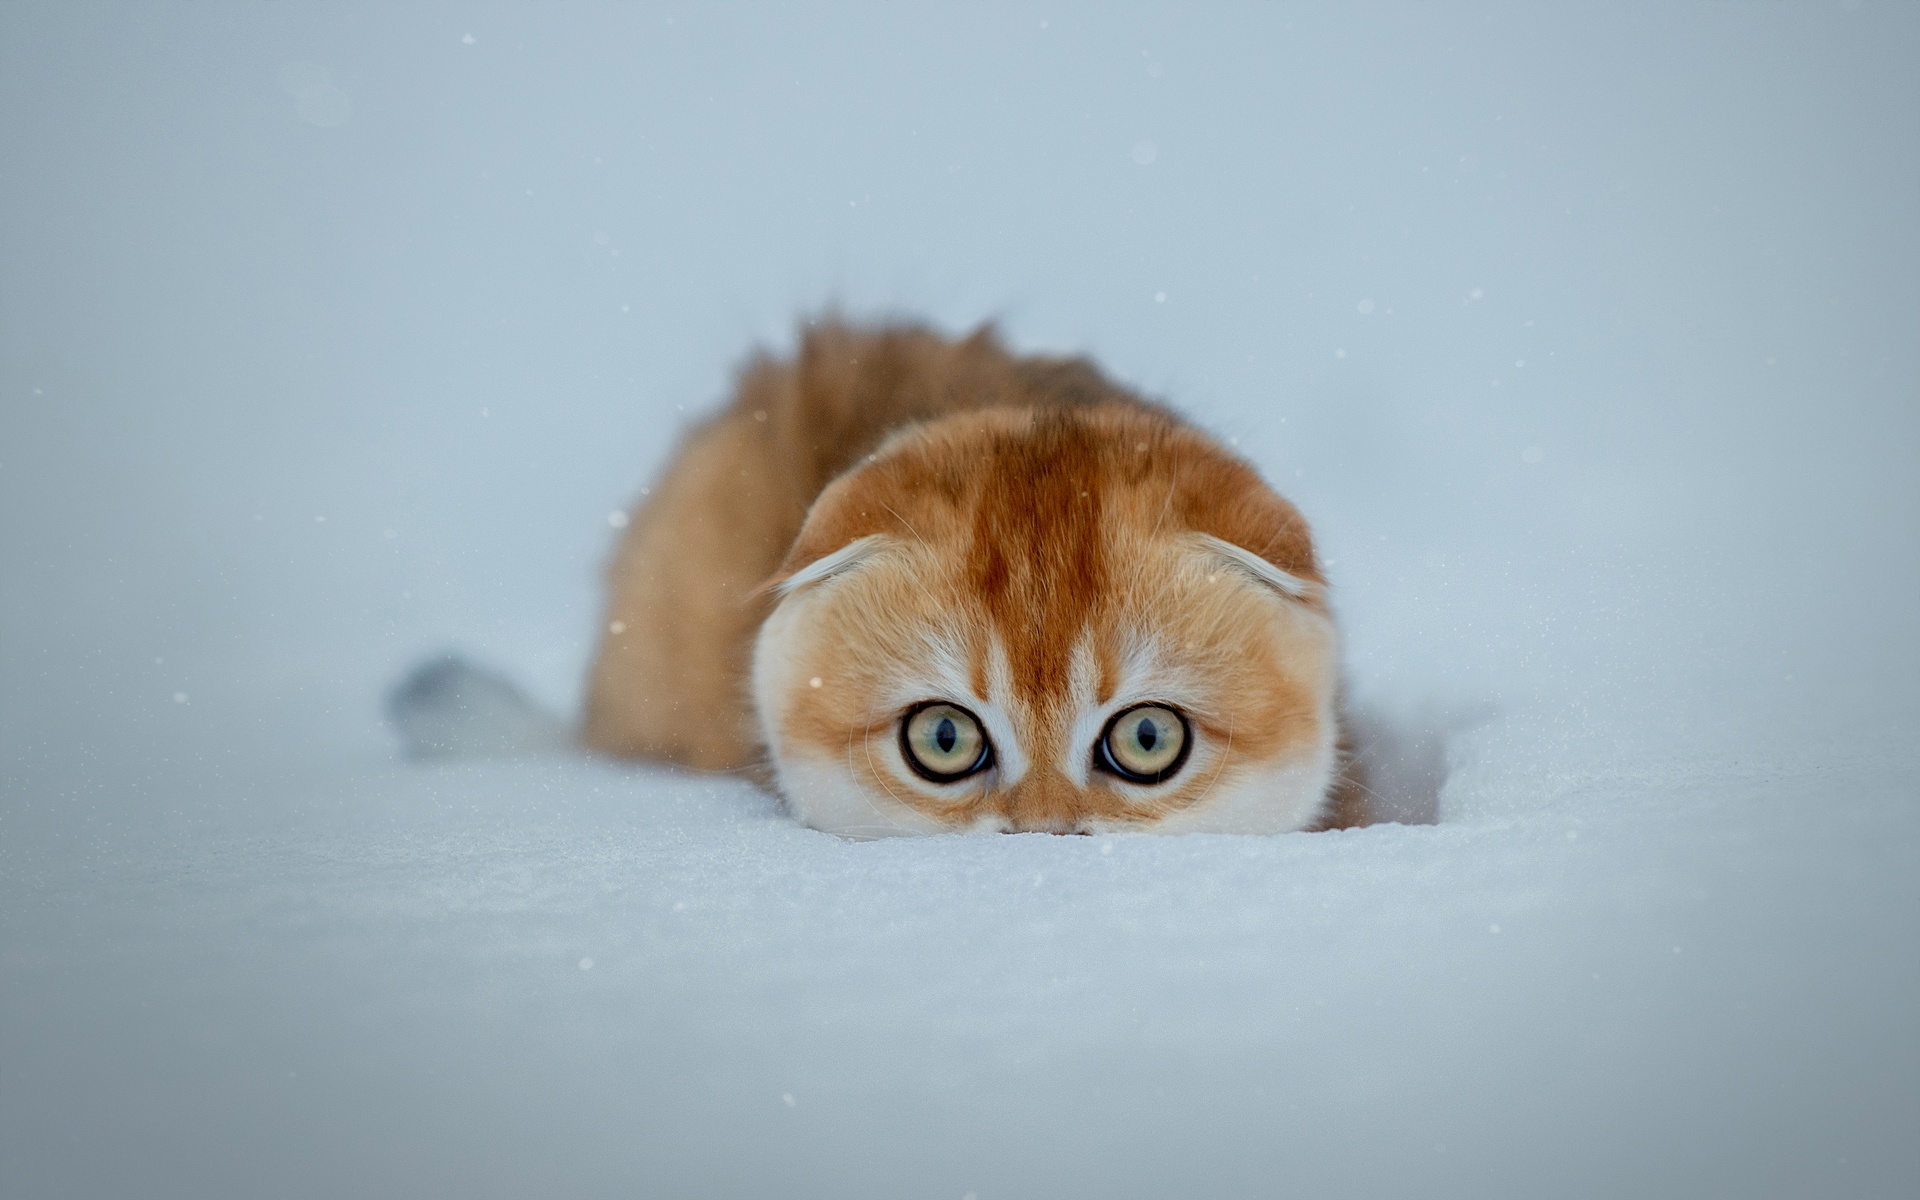 A red kitty hiding in the snow